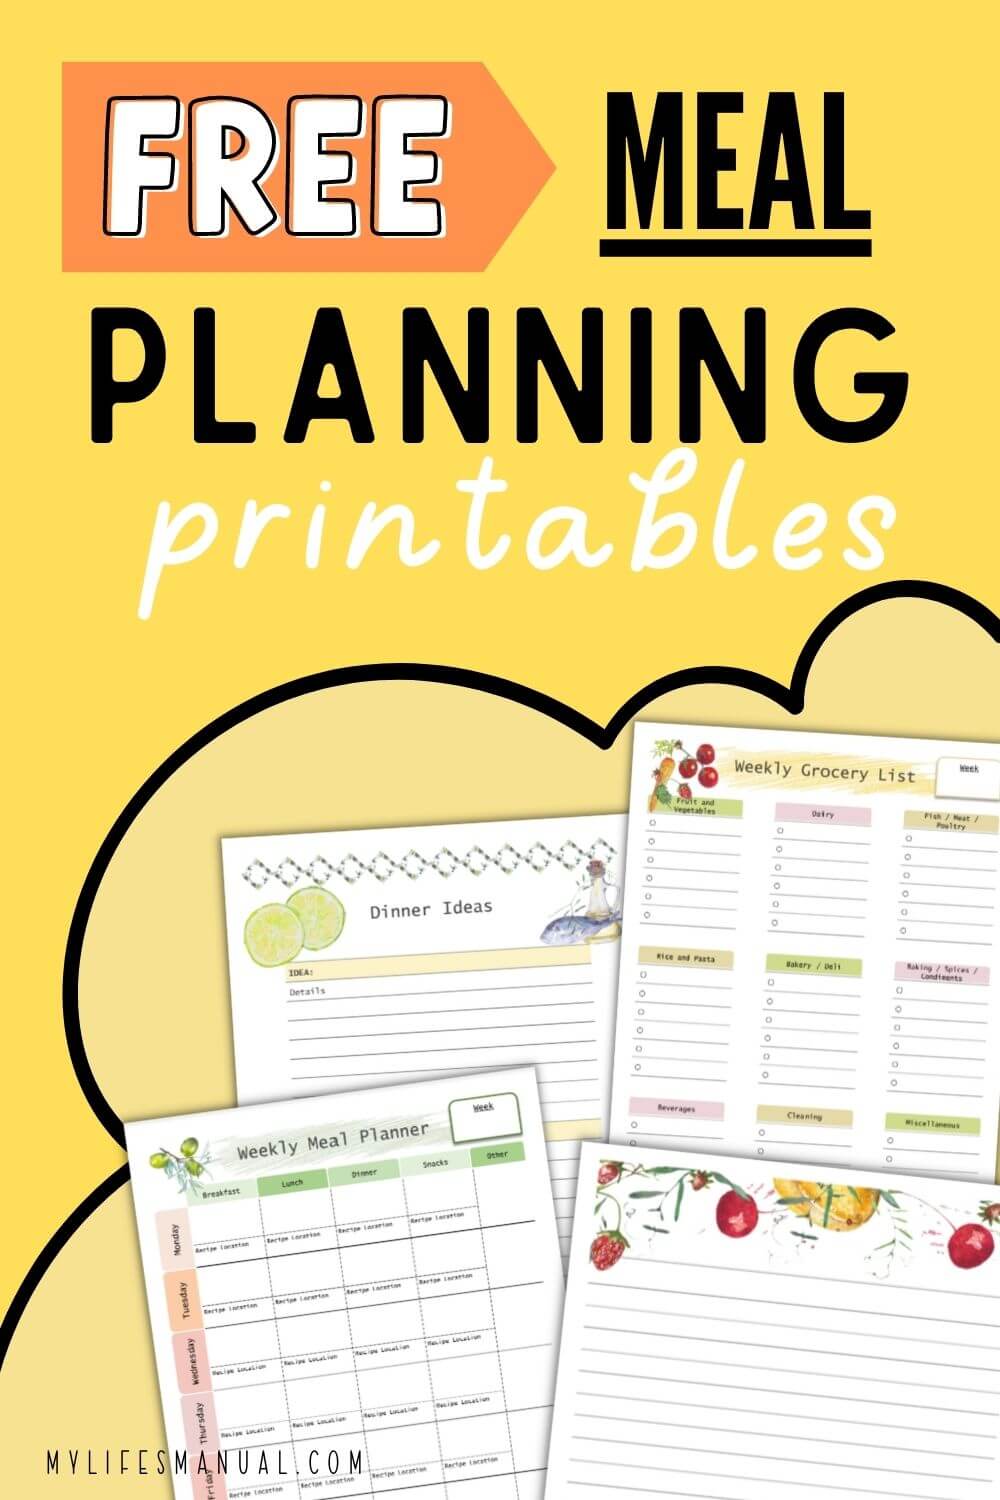 Need help with meal planning? Grab these free meal planning printables. Grocery list, meal planner, dinner ideas, instant pot recipes, and healthy meal planning guide. Click to download.